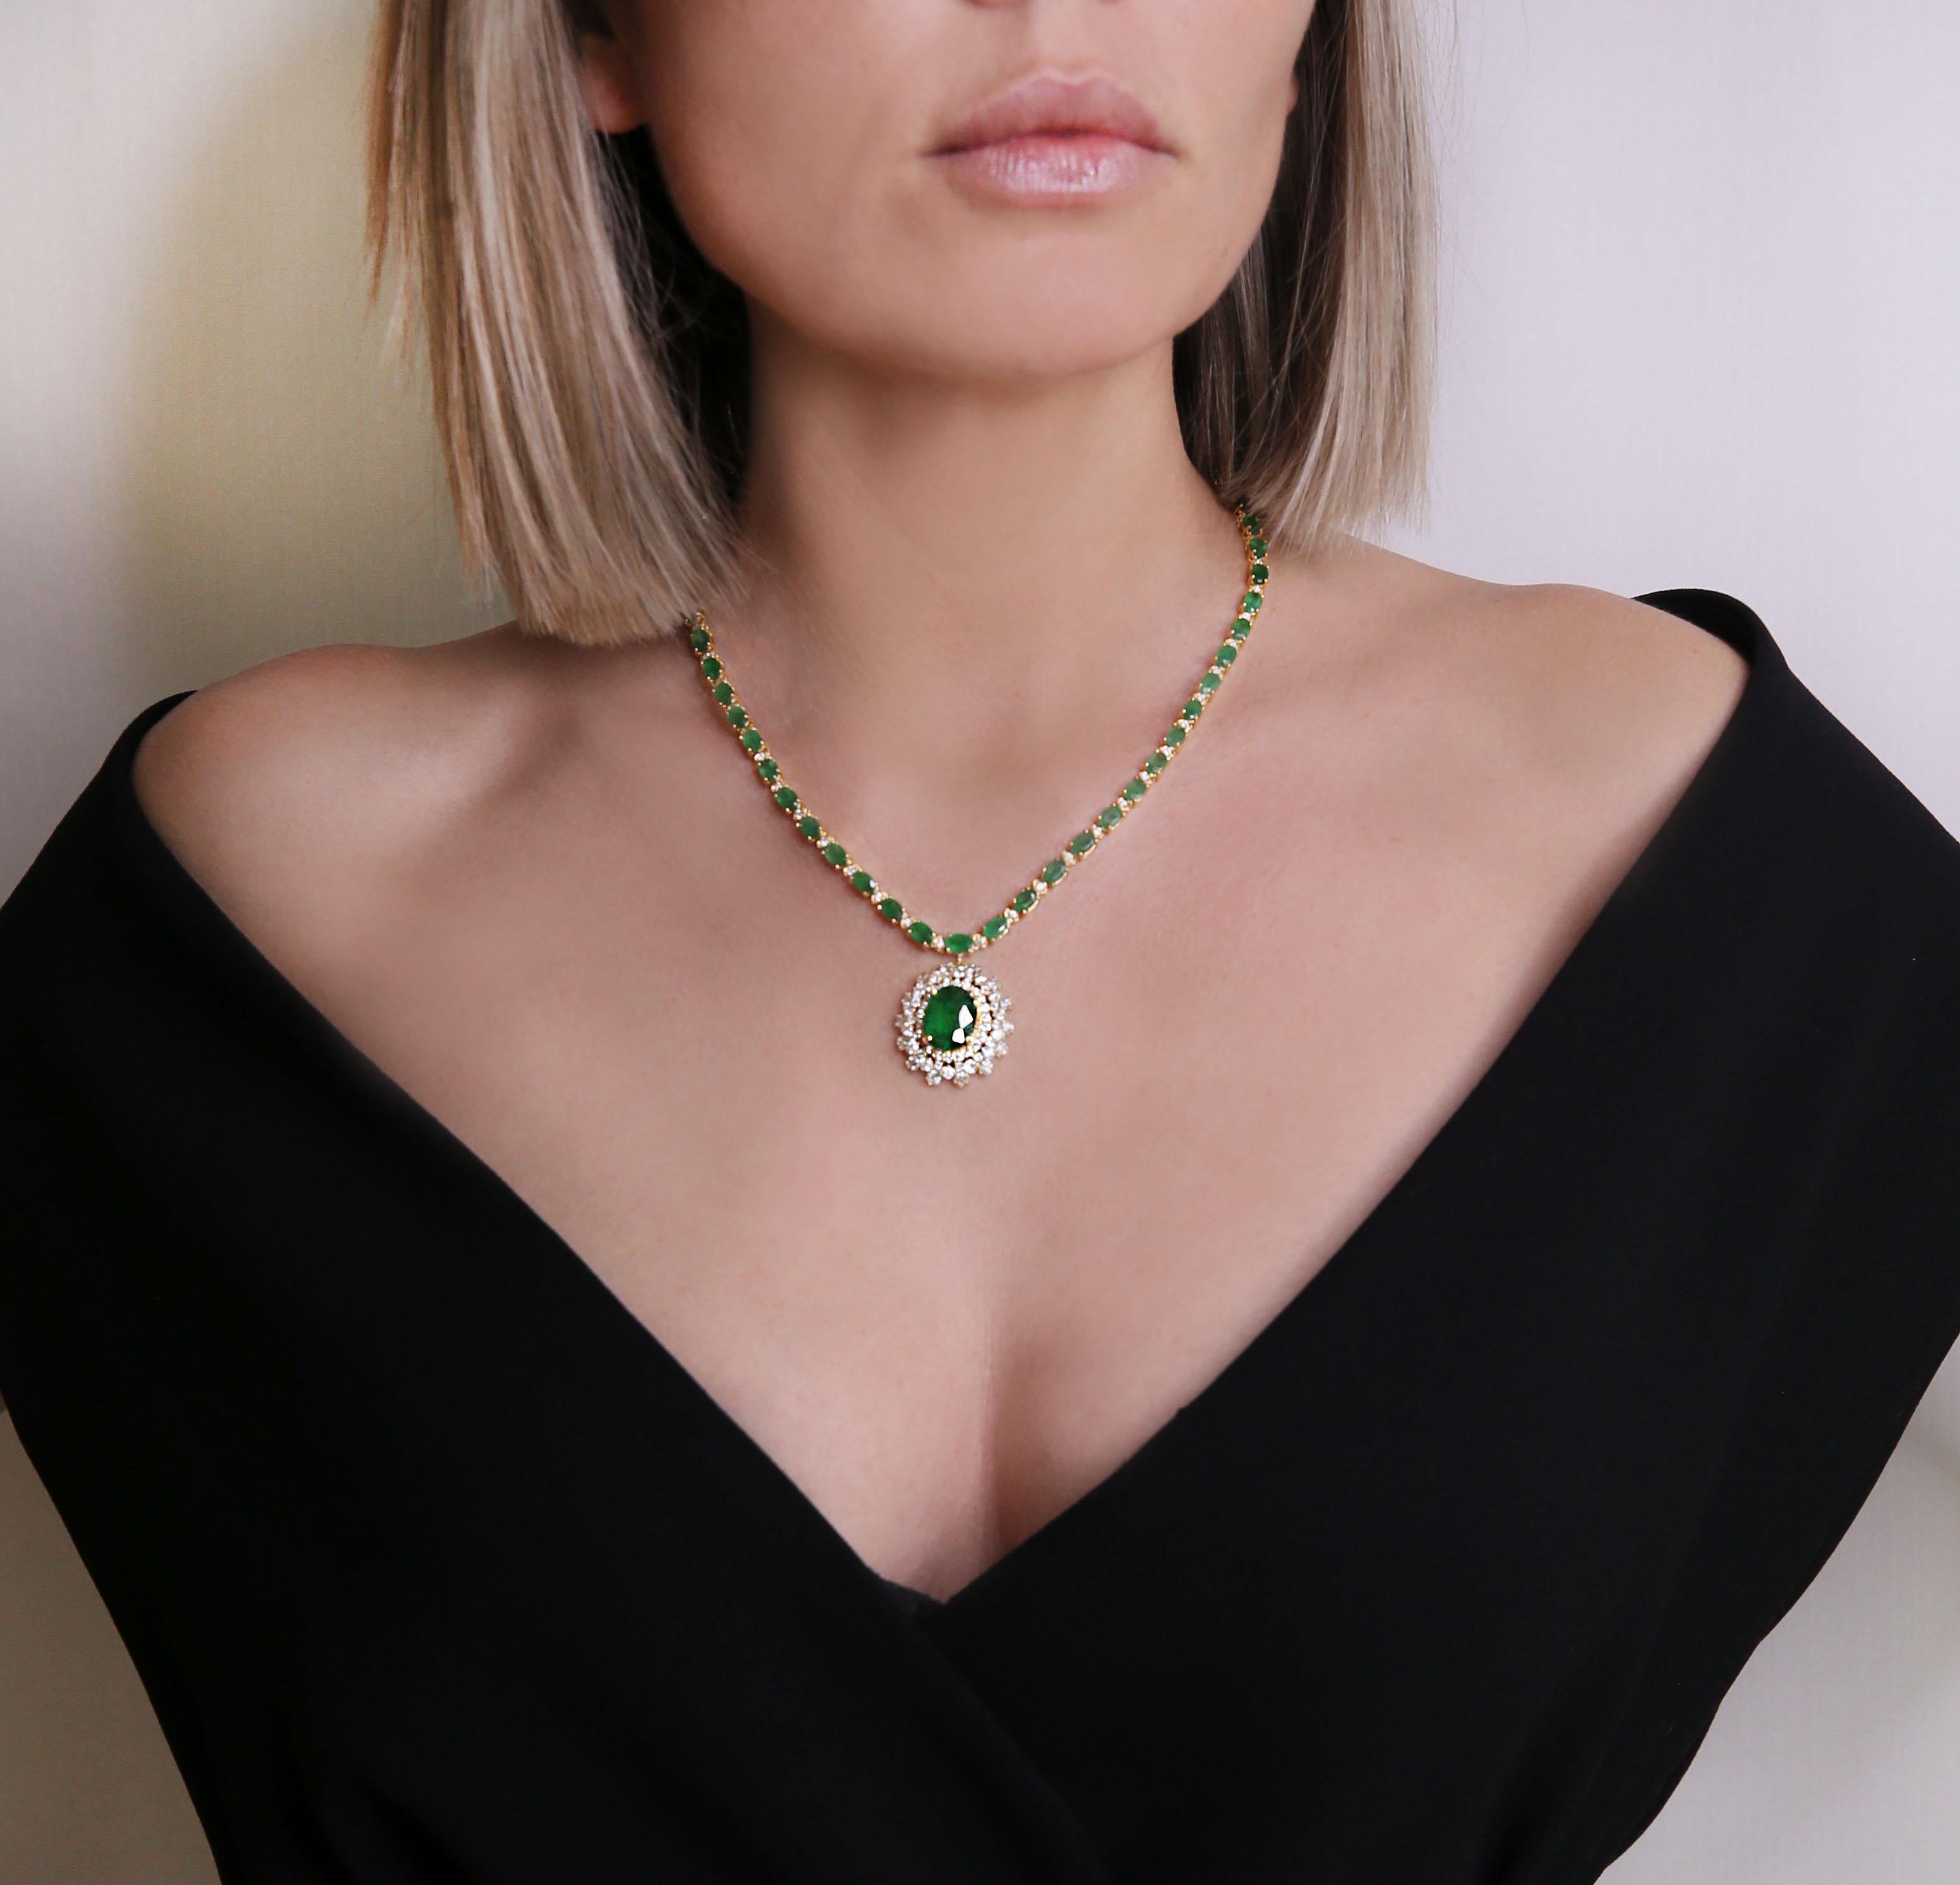 45.07 CTW Emerald 18K Yellow Gold Diamond Necklace

Stamped: 18K
Total Necklace Weight: 36 Grams
Necklace Length: 18 Inches
Center Emerald Weight: 6.61 Carat (14.60x11.10 Millimeters)
Side Emerald Weight 40.10 Carat (7.00x5.00 Millimeters)
Diamond